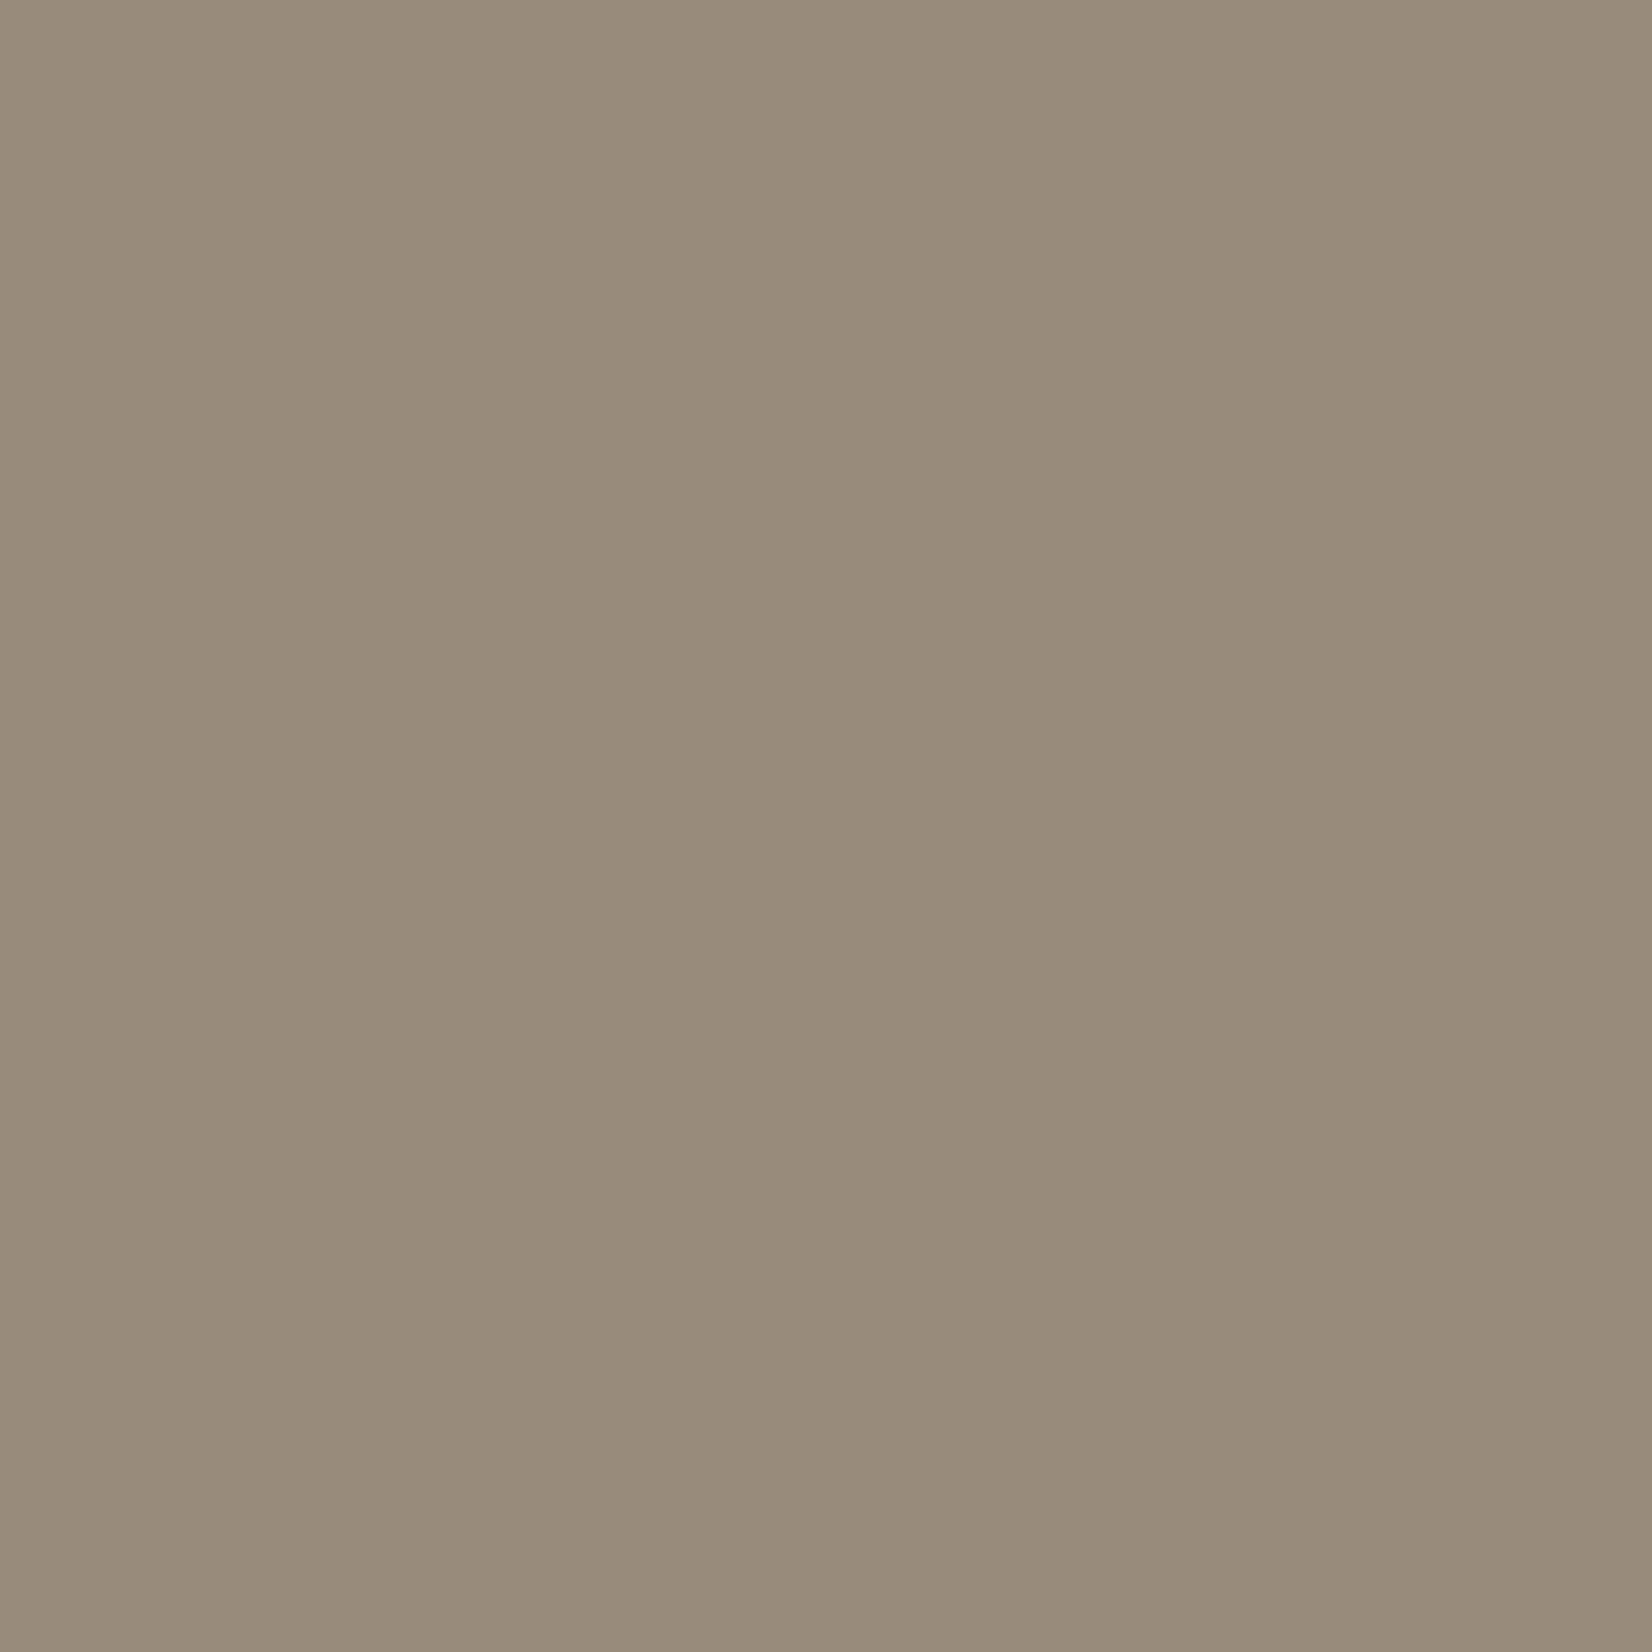 PRISMACOLOR CHISEL MARKER PM161 FRENCH GRAY 70% (FINAL SALE) (TBD)